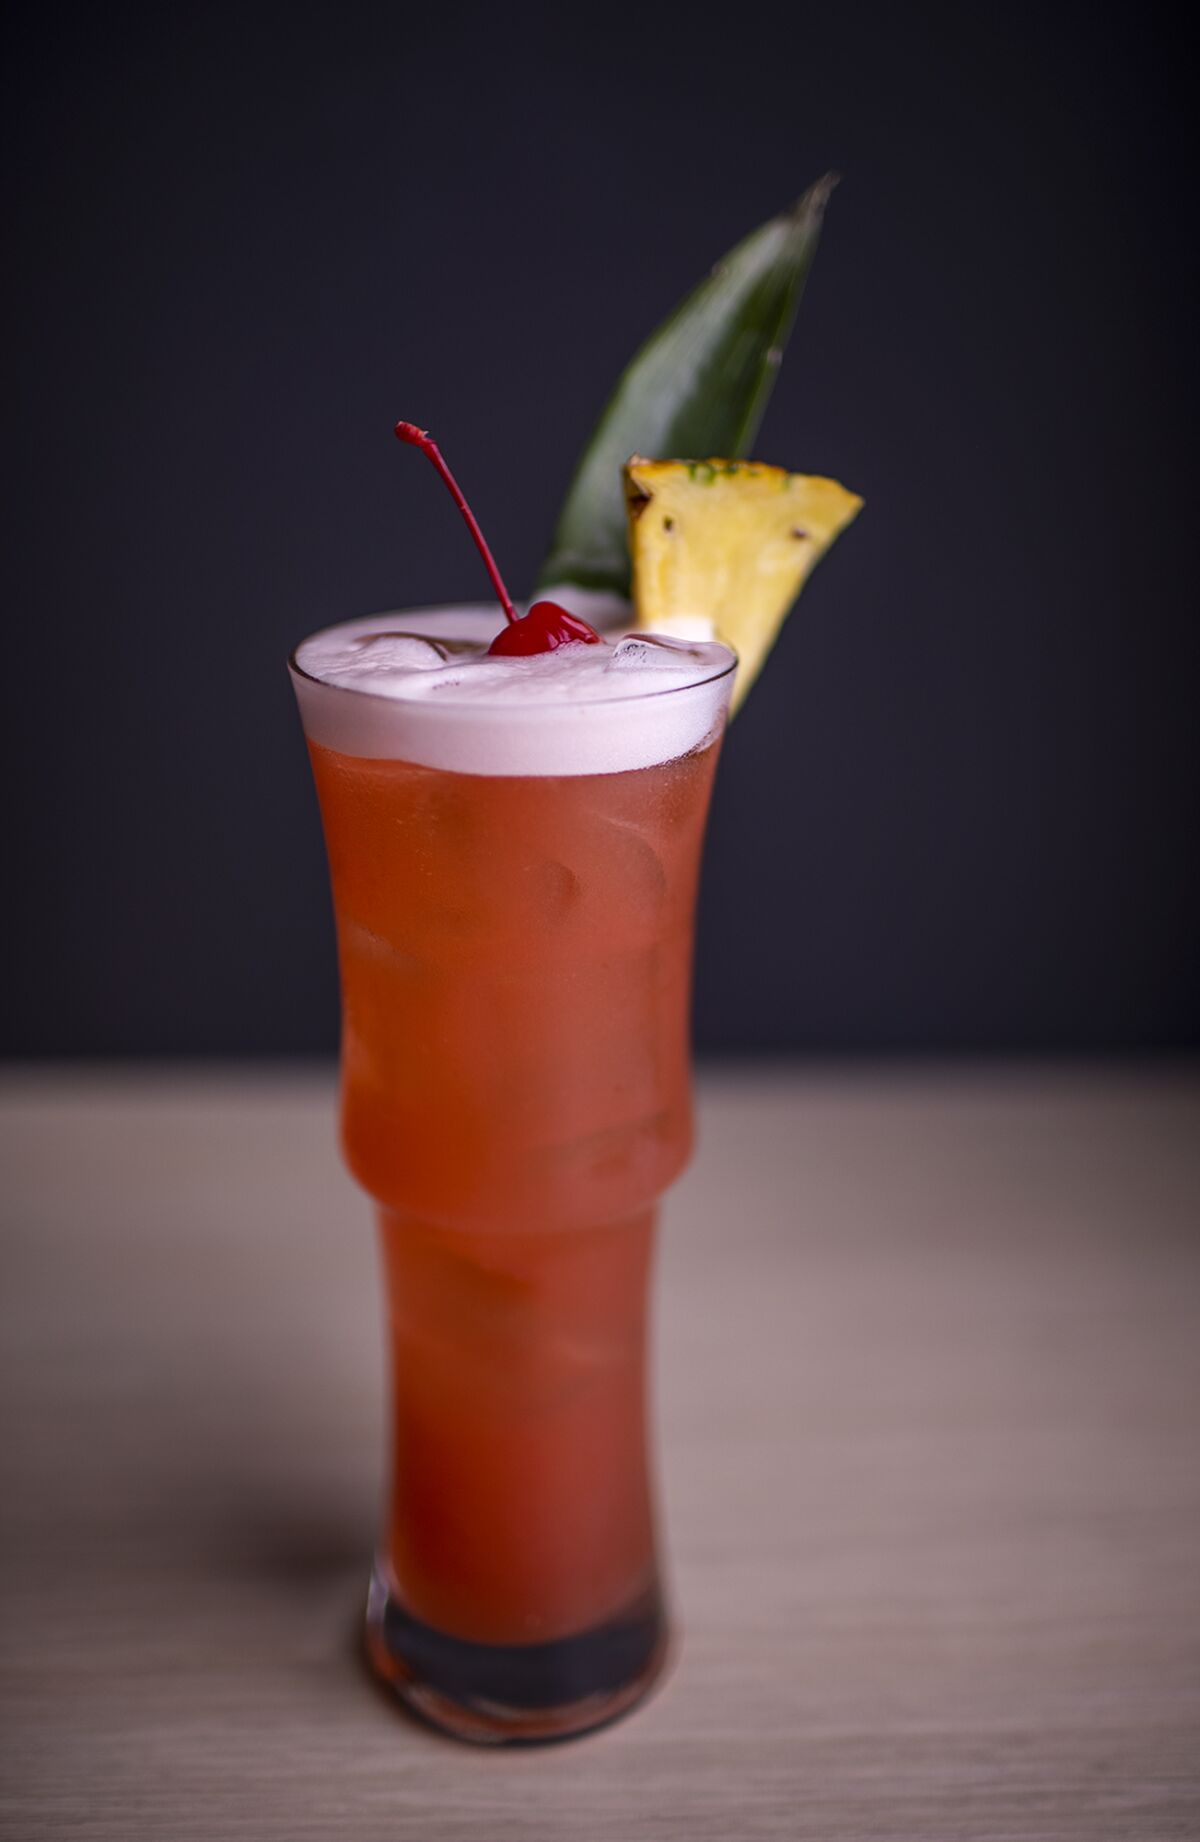 The Singapore Sling from Paradise Dynasty, photographed on Wednesday, Sept. 14.